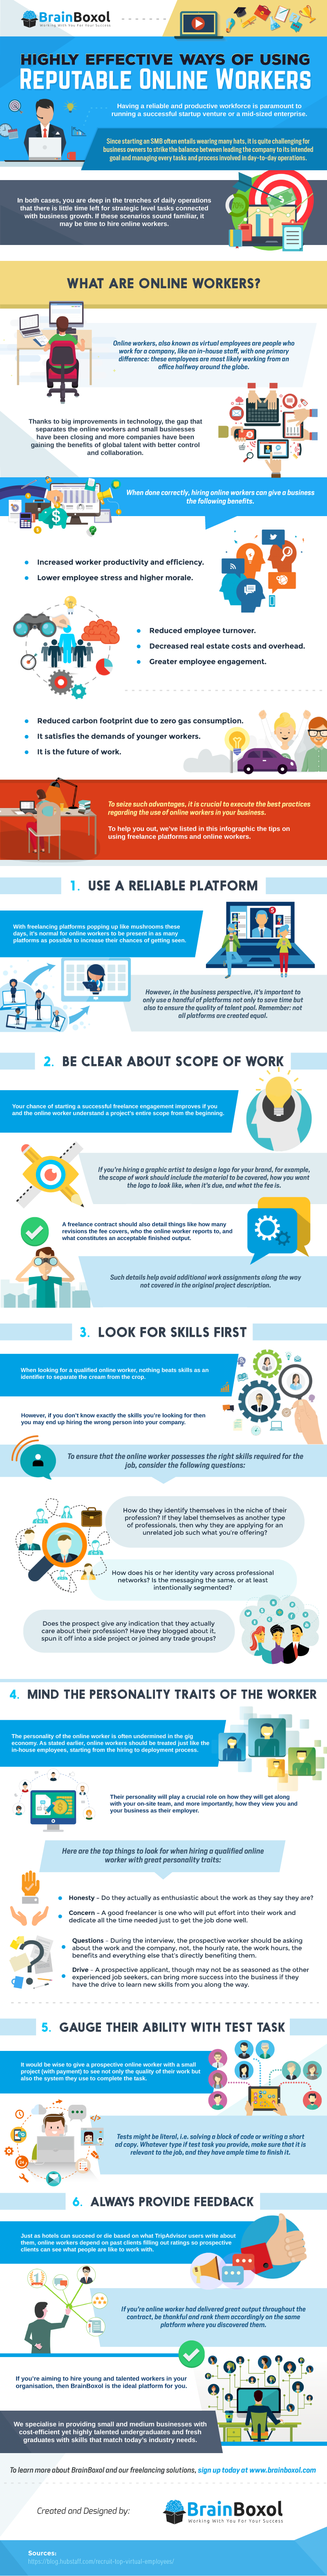 Highly Effective Ways of Using Reputable Online Workers - #Infographic